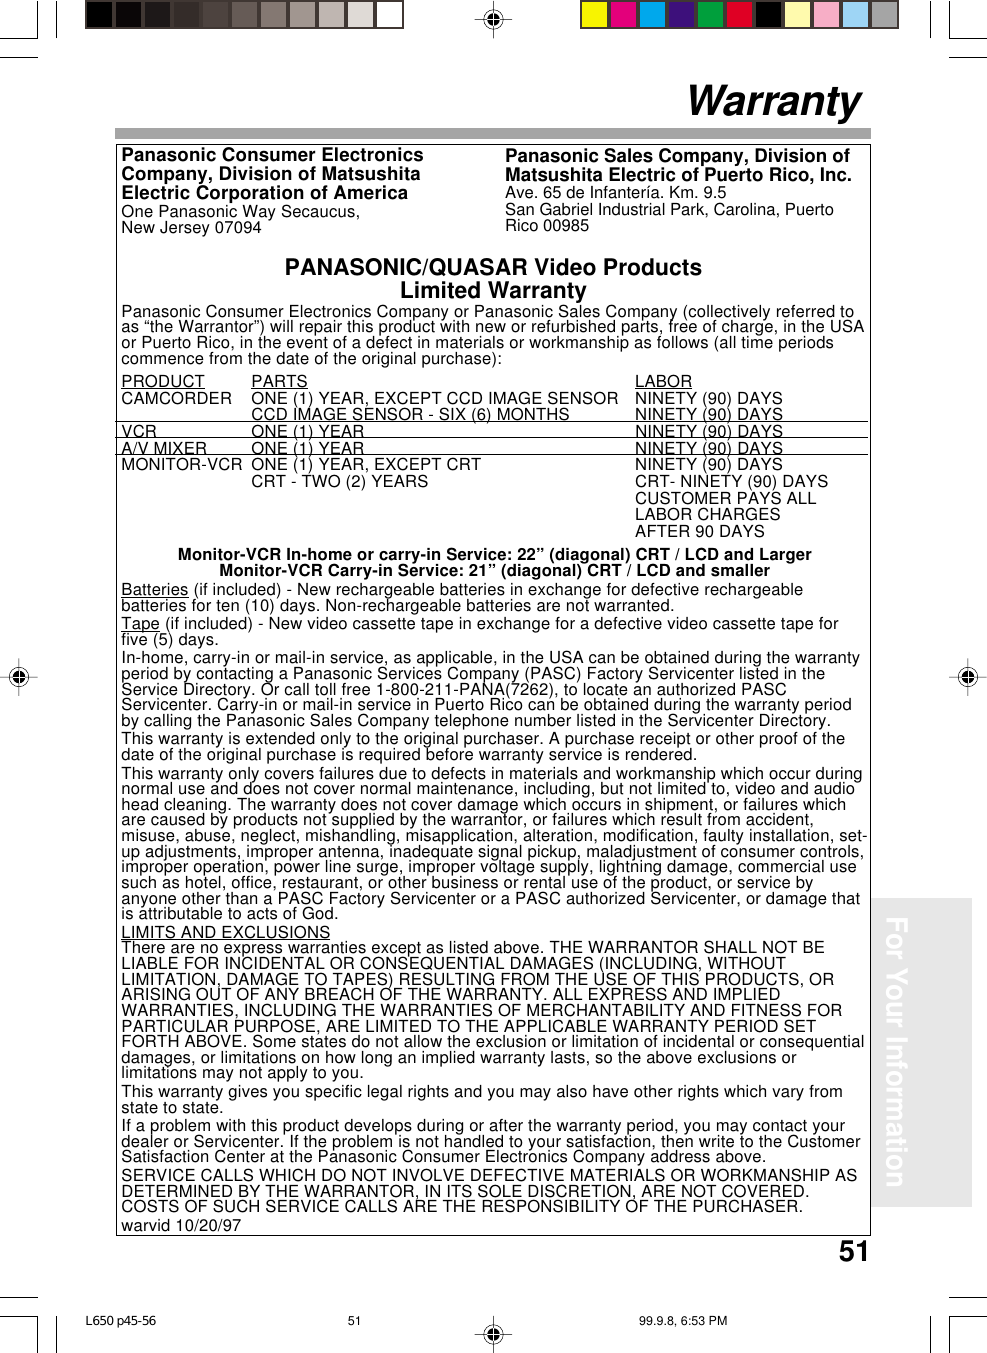 51For Your InformationWarrantyPanasonic Consumer Electronics Company or Panasonic Sales Company (collectively referred toas “the Warrantor”) will repair this product with new or refurbished parts, free of charge, in the USAor Puerto Rico, in the event of a defect in materials or workmanship as follows (all time periodscommence from the date of the original purchase):PRODUCT PARTS LABORCAMCORDER ONE (1) YEAR, EXCEPT CCD IMAGE SENSOR NINETY (90) DAYSCCD IMAGE SENSOR - SIX (6) MONTHS NINETY (90) DAYSVCR ONE (1) YEAR NINETY (90) DAYSA/V MIXER ONE (1) YEAR NINETY (90) DAYSMONITOR-VCR ONE (1) YEAR, EXCEPT CRT NINETY (90) DAYSCRT - TWO (2) YEARS CRT- NINETY (90) DAYSCUSTOMER PAYS ALLLABOR CHARGESAFTER 90 DAYSMonitor-VCR In-home or carry-in Service: 22” (diagonal) CRT / LCD and LargerMonitor-VCR Carry-in Service: 21” (diagonal) CRT / LCD and smallerBatteries (if included) - New rechargeable batteries in exchange for defective rechargeablebatteries for ten (10) days. Non-rechargeable batteries are not warranted.Tape (if included) - New video cassette tape in exchange for a defective video cassette tape forfive (5) days.In-home, carry-in or mail-in service, as applicable, in the USA can be obtained during the warrantyperiod by contacting a Panasonic Services Company (PASC) Factory Servicenter listed in theService Directory. Or call toll free 1-800-211-PANA(7262), to locate an authorized PASCServicenter. Carry-in or mail-in service in Puerto Rico can be obtained during the warranty periodby calling the Panasonic Sales Company telephone number listed in the Servicenter Directory.This warranty is extended only to the original purchaser. A purchase receipt or other proof of thedate of the original purchase is required before warranty service is rendered.This warranty only covers failures due to defects in materials and workmanship which occur duringnormal use and does not cover normal maintenance, including, but not limited to, video and audiohead cleaning. The warranty does not cover damage which occurs in shipment, or failures whichare caused by products not supplied by the warrantor, or failures which result from accident,misuse, abuse, neglect, mishandling, misapplication, alteration, modification, faulty installation, set-up adjustments, improper antenna, inadequate signal pickup, maladjustment of consumer controls,improper operation, power line surge, improper voltage supply, lightning damage, commercial usesuch as hotel, office, restaurant, or other business or rental use of the product, or service byanyone other than a PASC Factory Servicenter or a PASC authorized Servicenter, or damage thatis attributable to acts of God.LIMITS AND EXCLUSIONSThere are no express warranties except as listed above. THE WARRANTOR SHALL NOT BELIABLE FOR INCIDENTAL OR CONSEQUENTIAL DAMAGES (INCLUDING, WITHOUTLIMITATION, DAMAGE TO TAPES) RESULTING FROM THE USE OF THIS PRODUCTS, ORARISING OUT OF ANY BREACH OF THE WARRANTY. ALL EXPRESS AND IMPLIEDWARRANTIES, INCLUDING THE WARRANTIES OF MERCHANTABILITY AND FITNESS FORPARTICULAR PURPOSE, ARE LIMITED TO THE APPLICABLE WARRANTY PERIOD SETFORTH ABOVE. Some states do not allow the exclusion or limitation of incidental or consequentialdamages, or limitations on how long an implied warranty lasts, so the above exclusions orlimitations may not apply to you.This warranty gives you specific legal rights and you may also have other rights which vary fromstate to state.If a problem with this product develops during or after the warranty period, you may contact yourdealer or Servicenter. If the problem is not handled to your satisfaction, then write to the CustomerSatisfaction Center at the Panasonic Consumer Electronics Company address above.SERVICE CALLS WHICH DO NOT INVOLVE DEFECTIVE MATERIALS OR WORKMANSHIP ASDETERMINED BY THE WARRANTOR, IN ITS SOLE DISCRETION, ARE NOT COVERED.COSTS OF SUCH SERVICE CALLS ARE THE RESPONSIBILITY OF THE PURCHASER.warvid 10/20/97PANASONIC/QUASAR Video ProductsLimited WarrantyPanasonic Sales Company, Division ofMatsushita Electric of Puerto Rico, Inc.Ave. 65 de Infantería. Km. 9.5San Gabriel Industrial Park, Carolina, PuertoRico 00985Panasonic Consumer ElectronicsCompany, Division of MatsushitaElectric Corporation of AmericaOne Panasonic Way Secaucus,New Jersey 07094L650 p45-56 99.9.8, 6:53 PM51